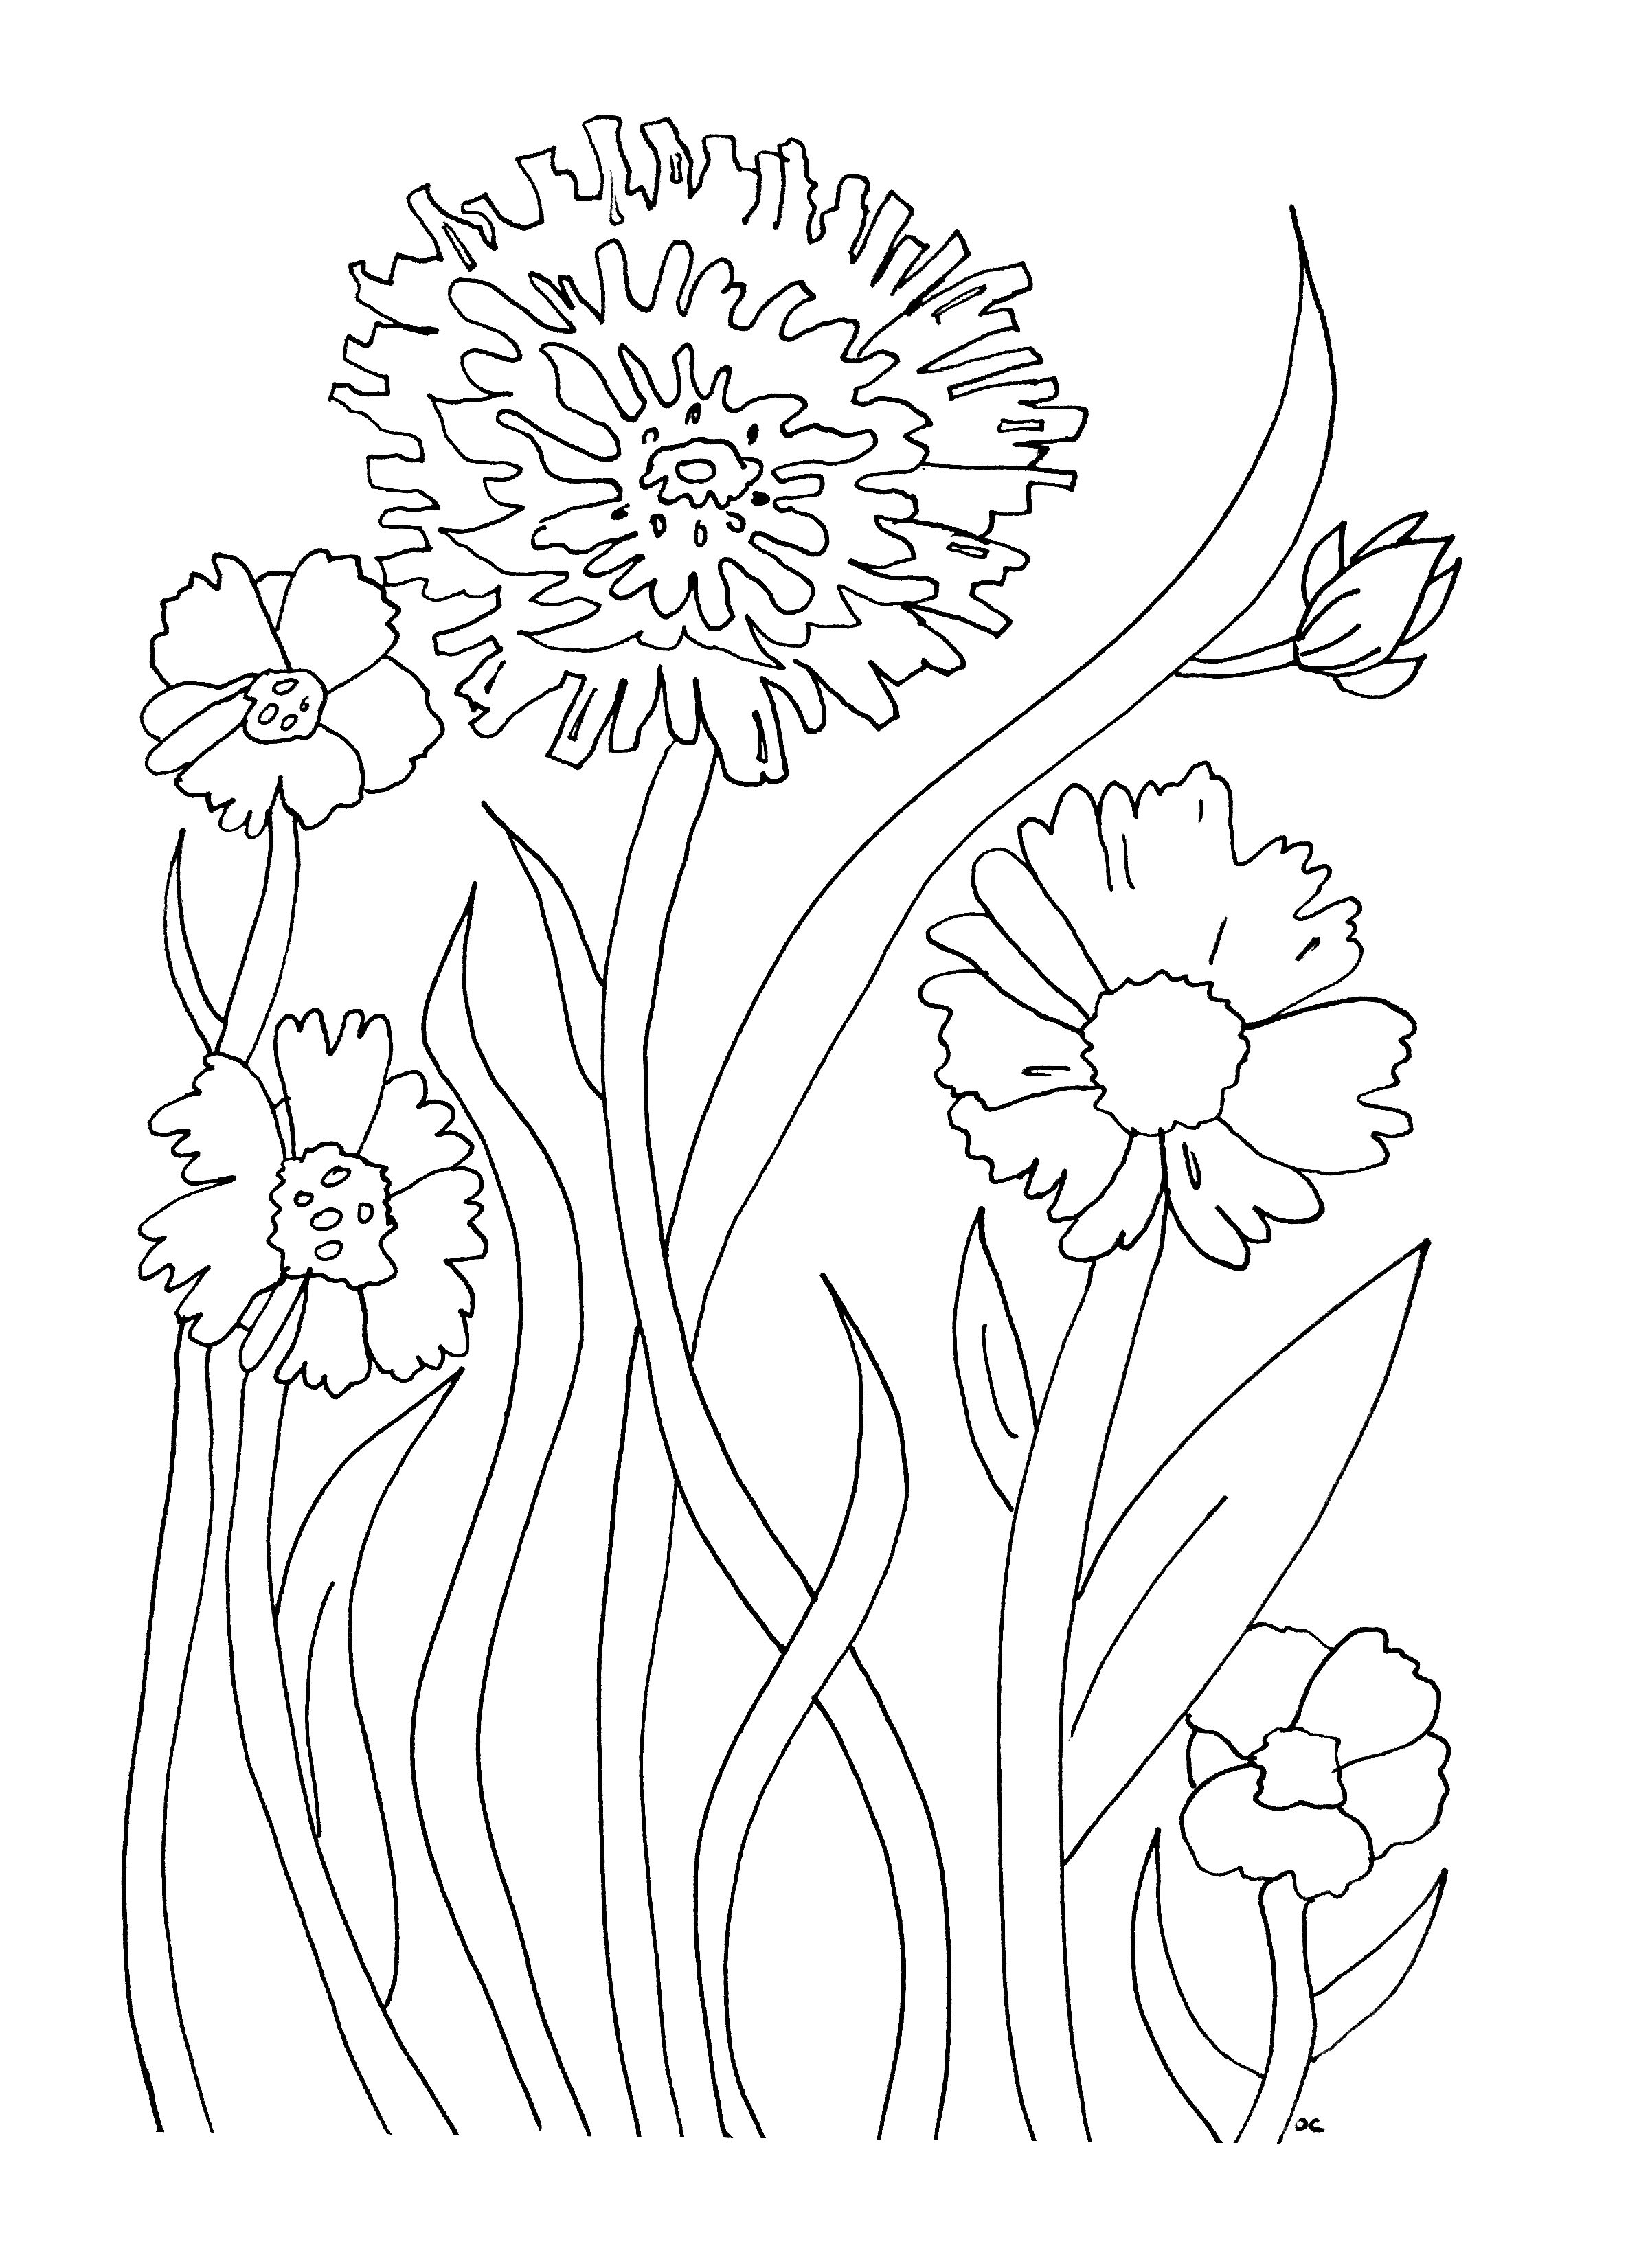 Coloring Sheets Flowers Printables